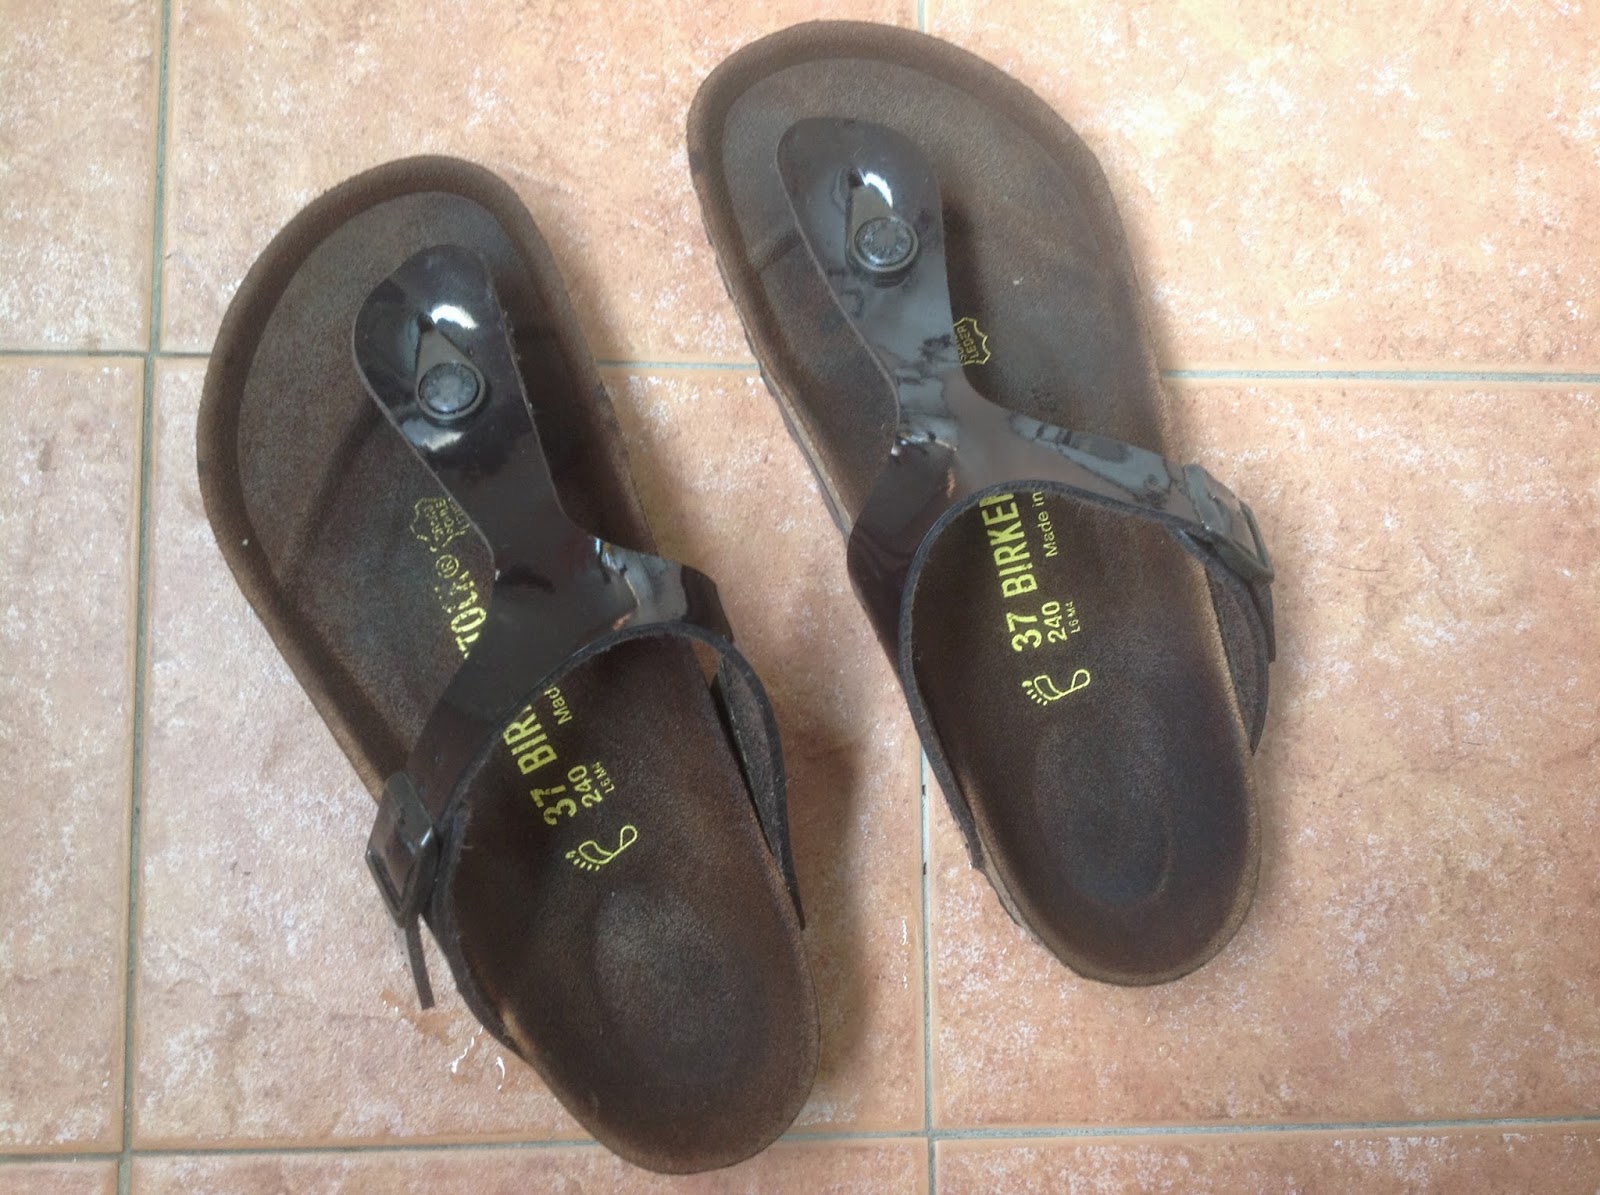 Taipei Beauty Closet: How To Clean Birkenstock Footbeds